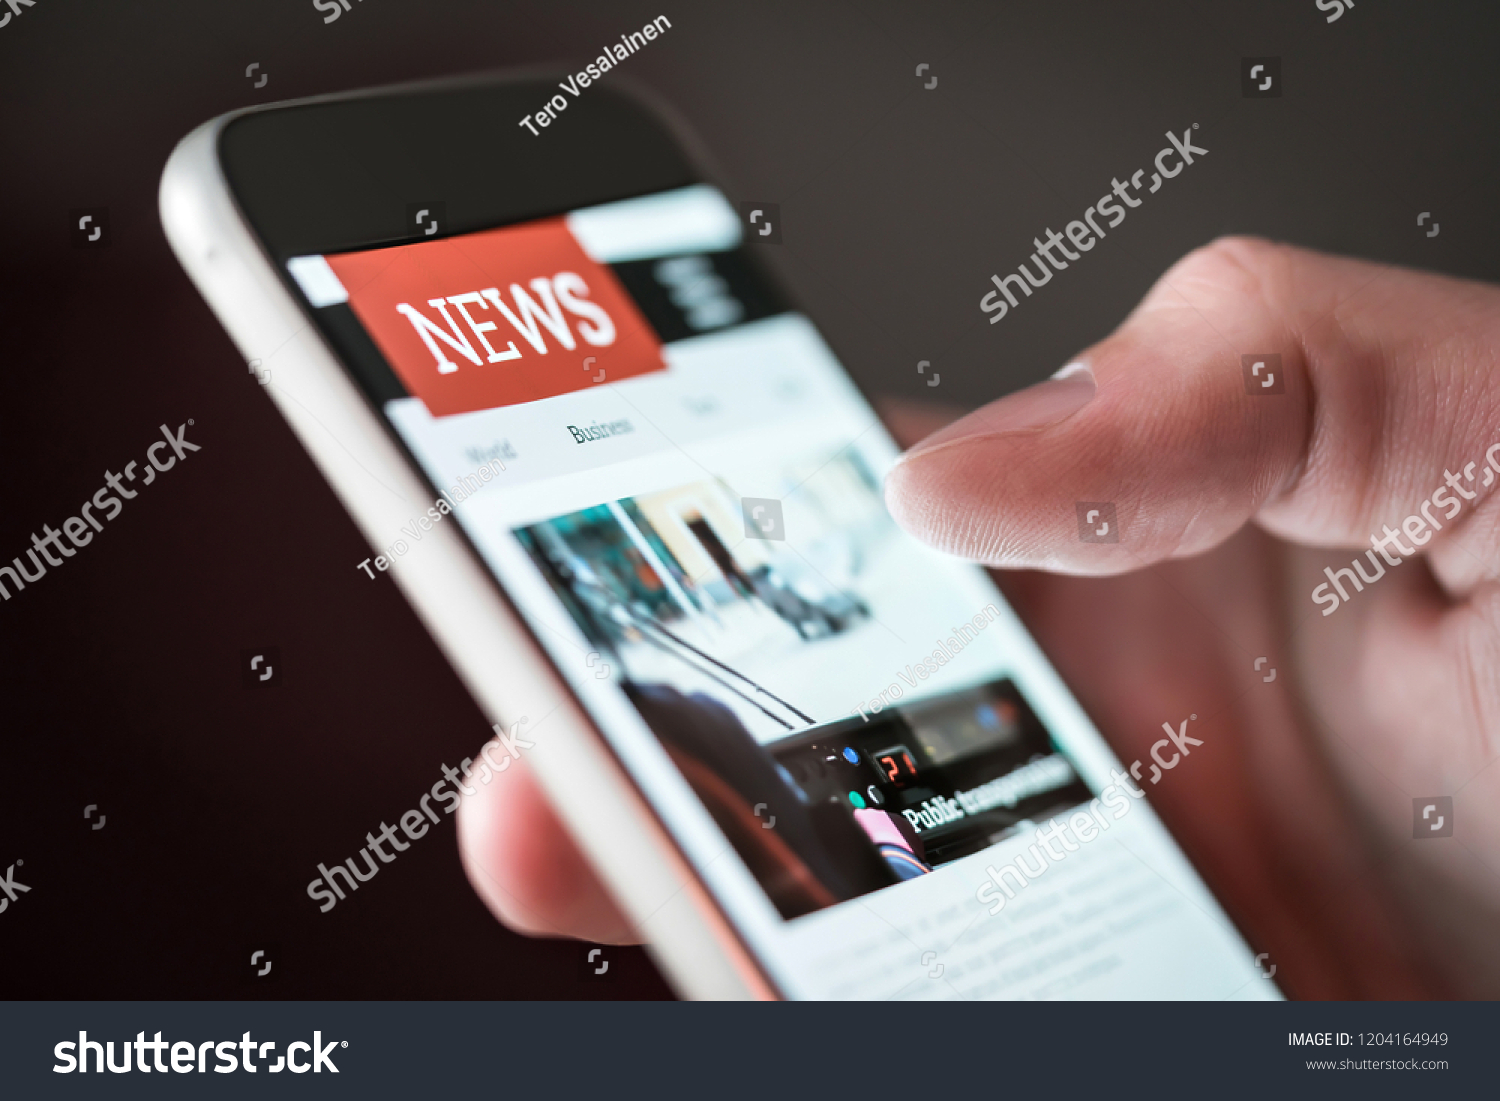 Mobile news application in smartphone. Man reading online news on website with cellphone. Person browsing latest articles on the internet. Light from phone screen. #1204164949